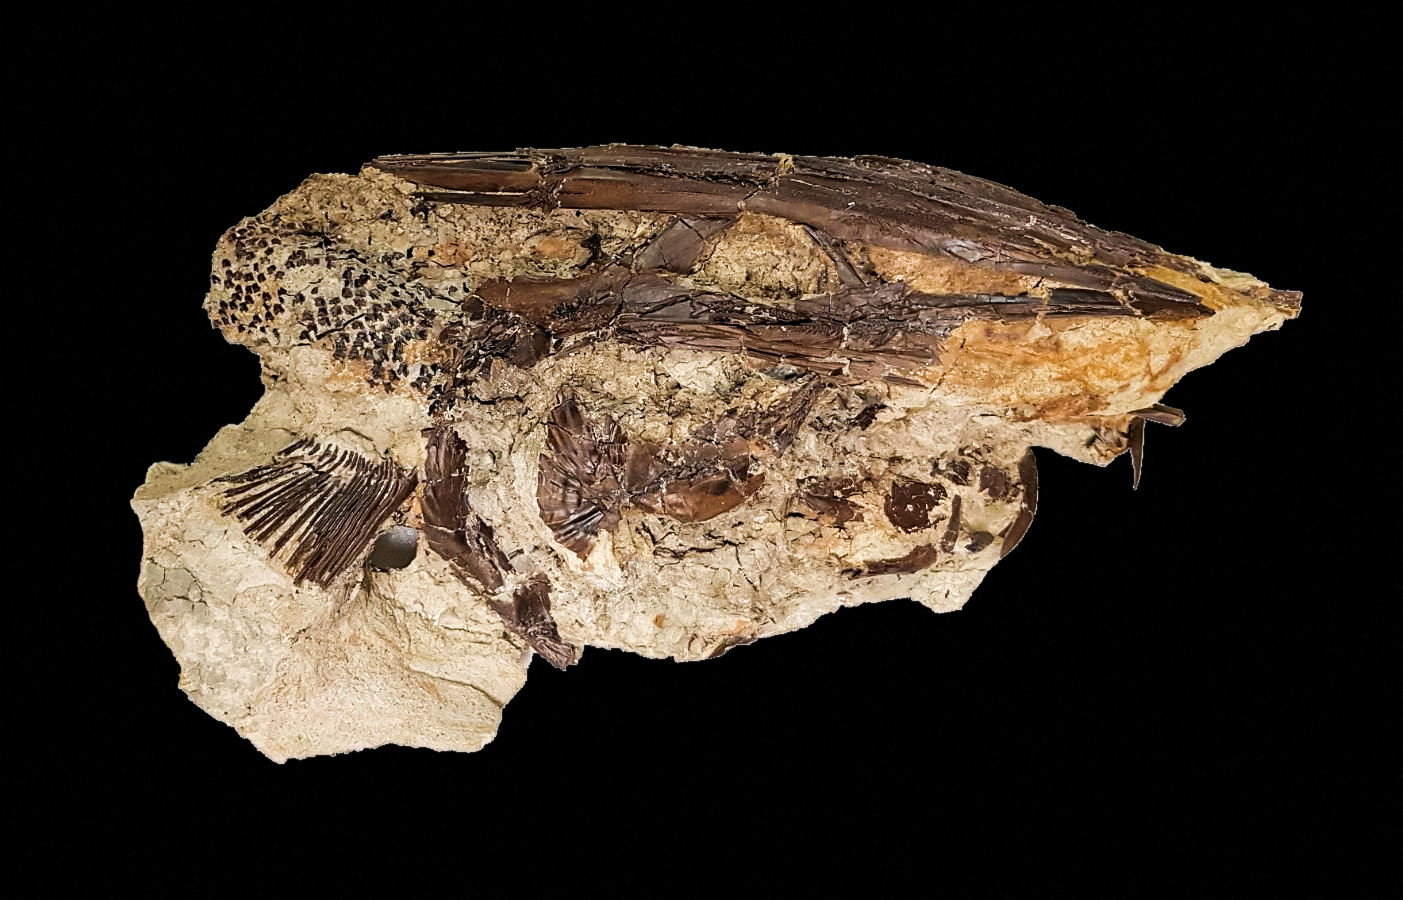 The fossil of a Cretaceous Period paddlefish from the Tanis site